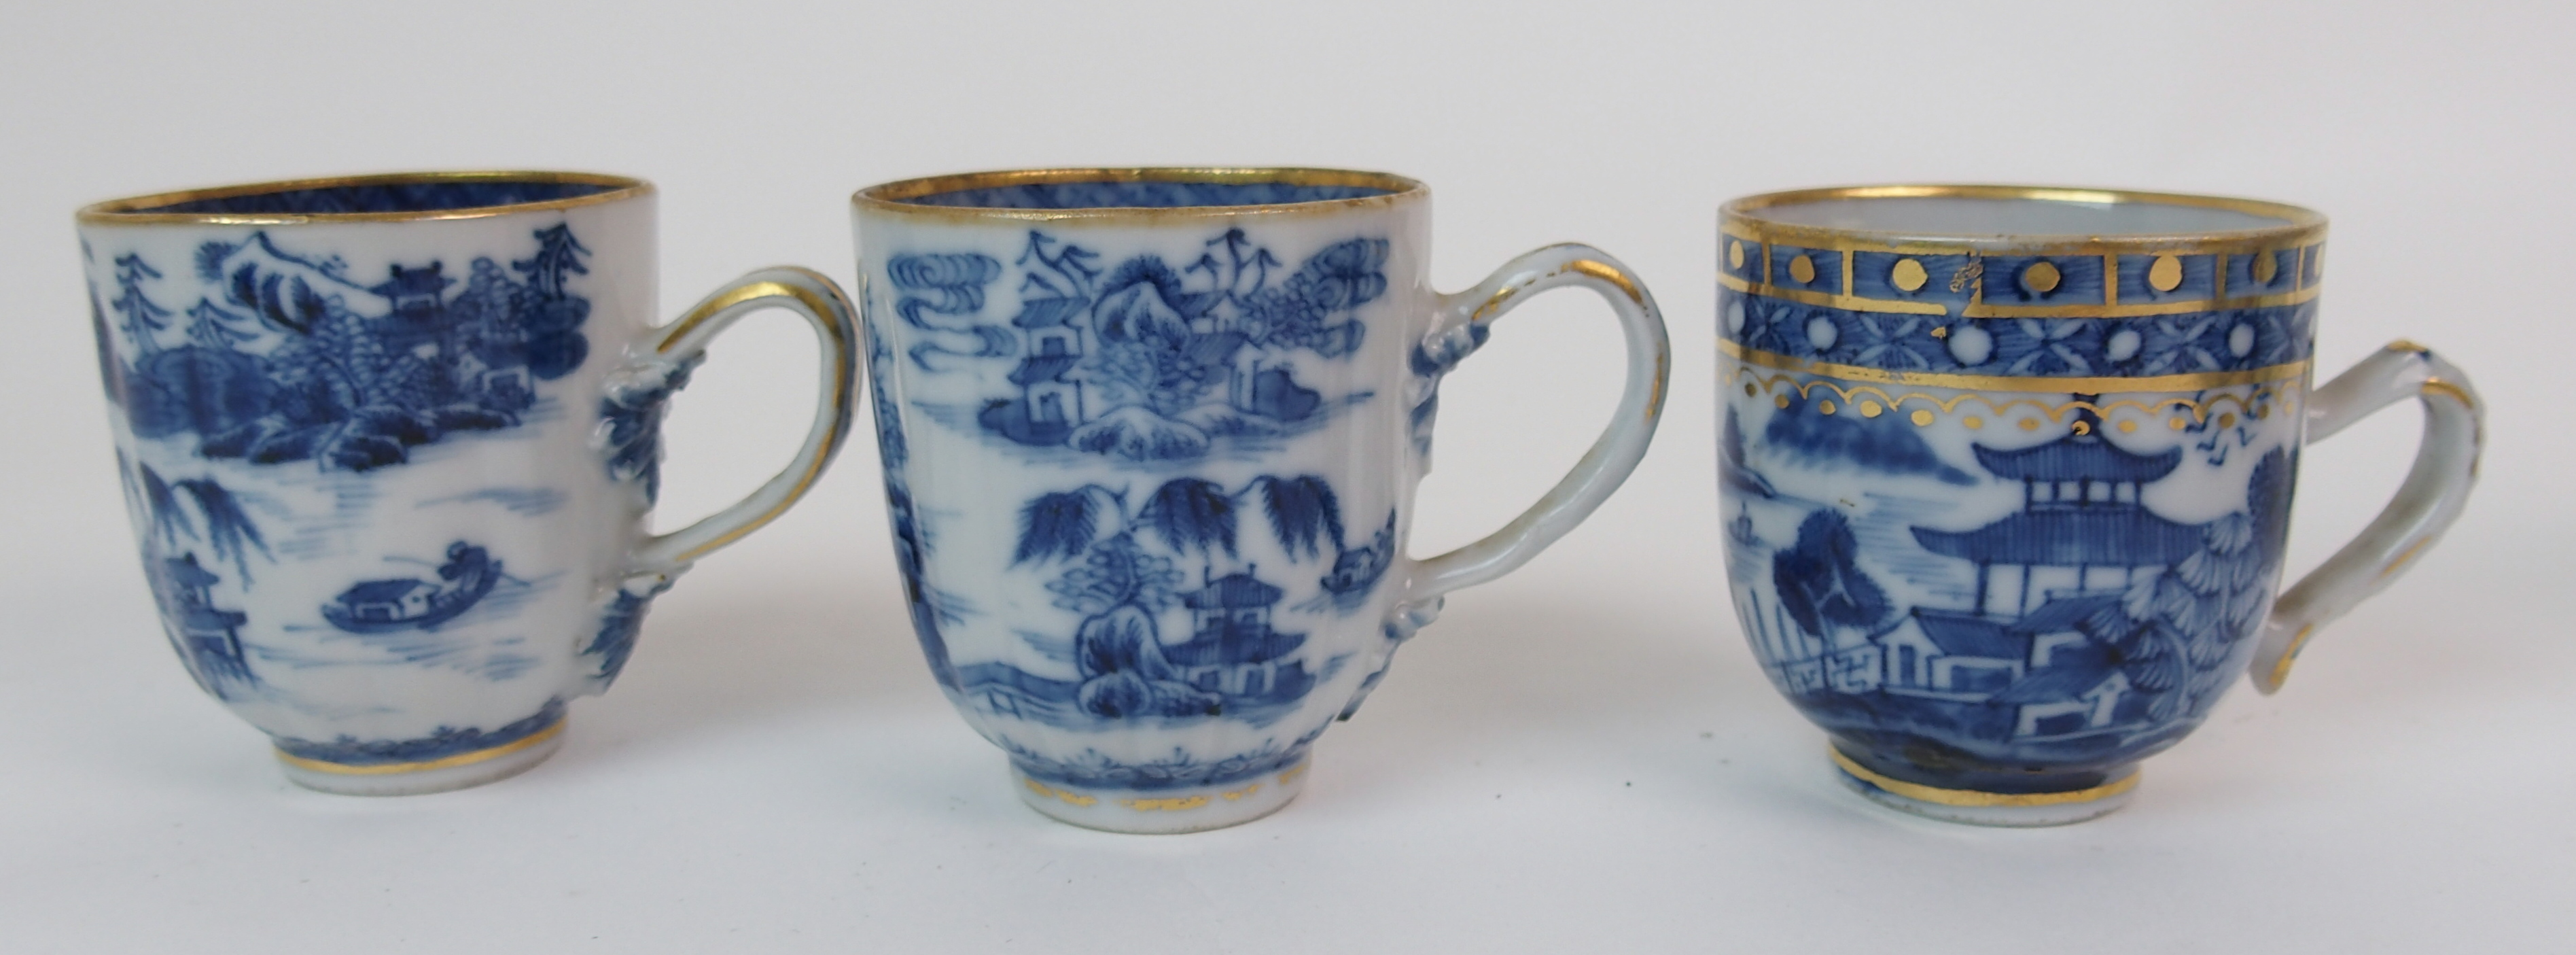 A group of twenty-three Chinese export teacups painted with typical landscapes and gilt rims, - Image 9 of 10